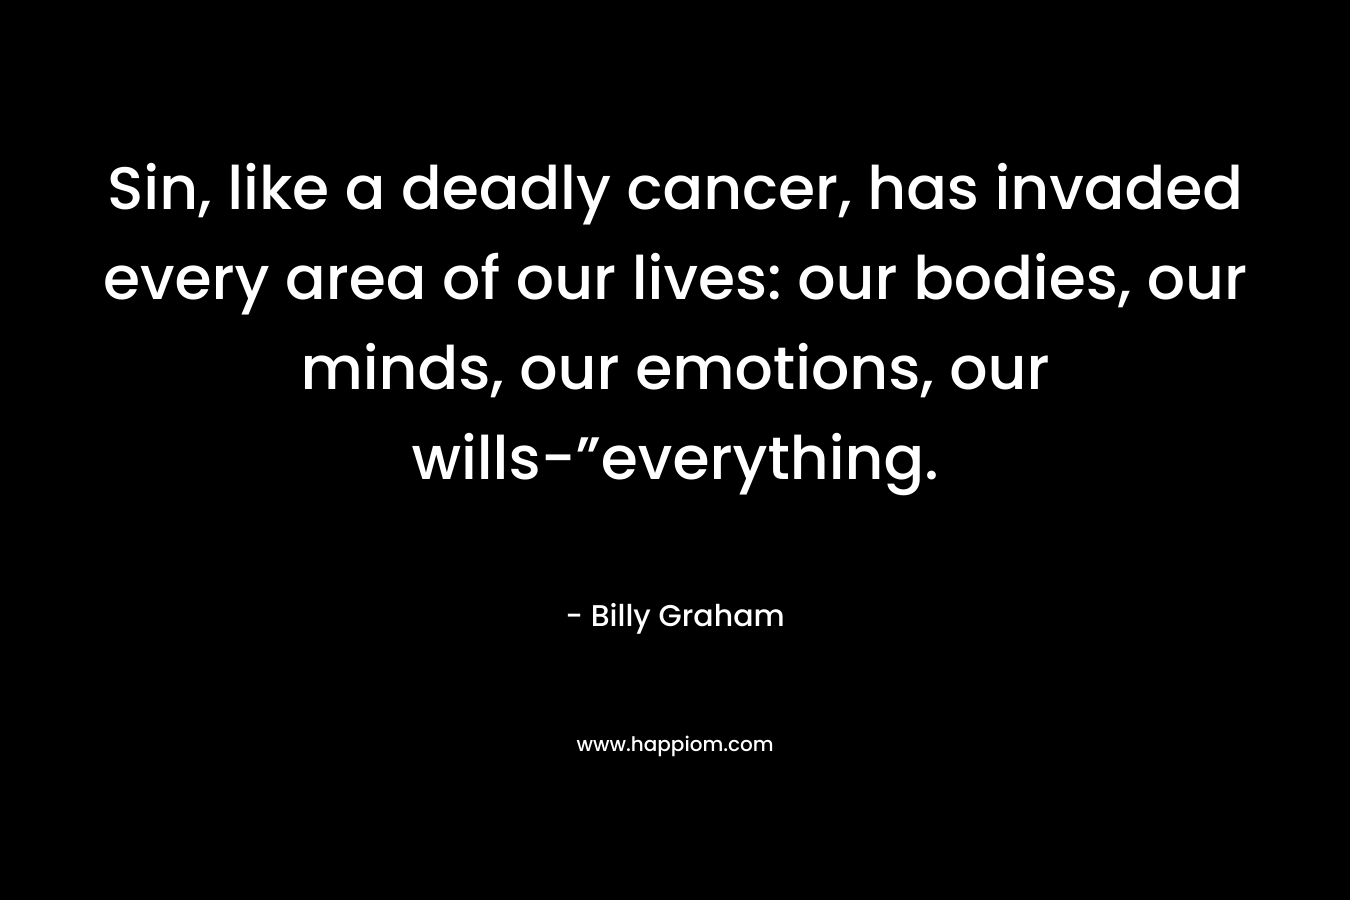 Sin, like a deadly cancer, has invaded every area of our lives: our bodies, our minds, our emotions, our wills-”everything.